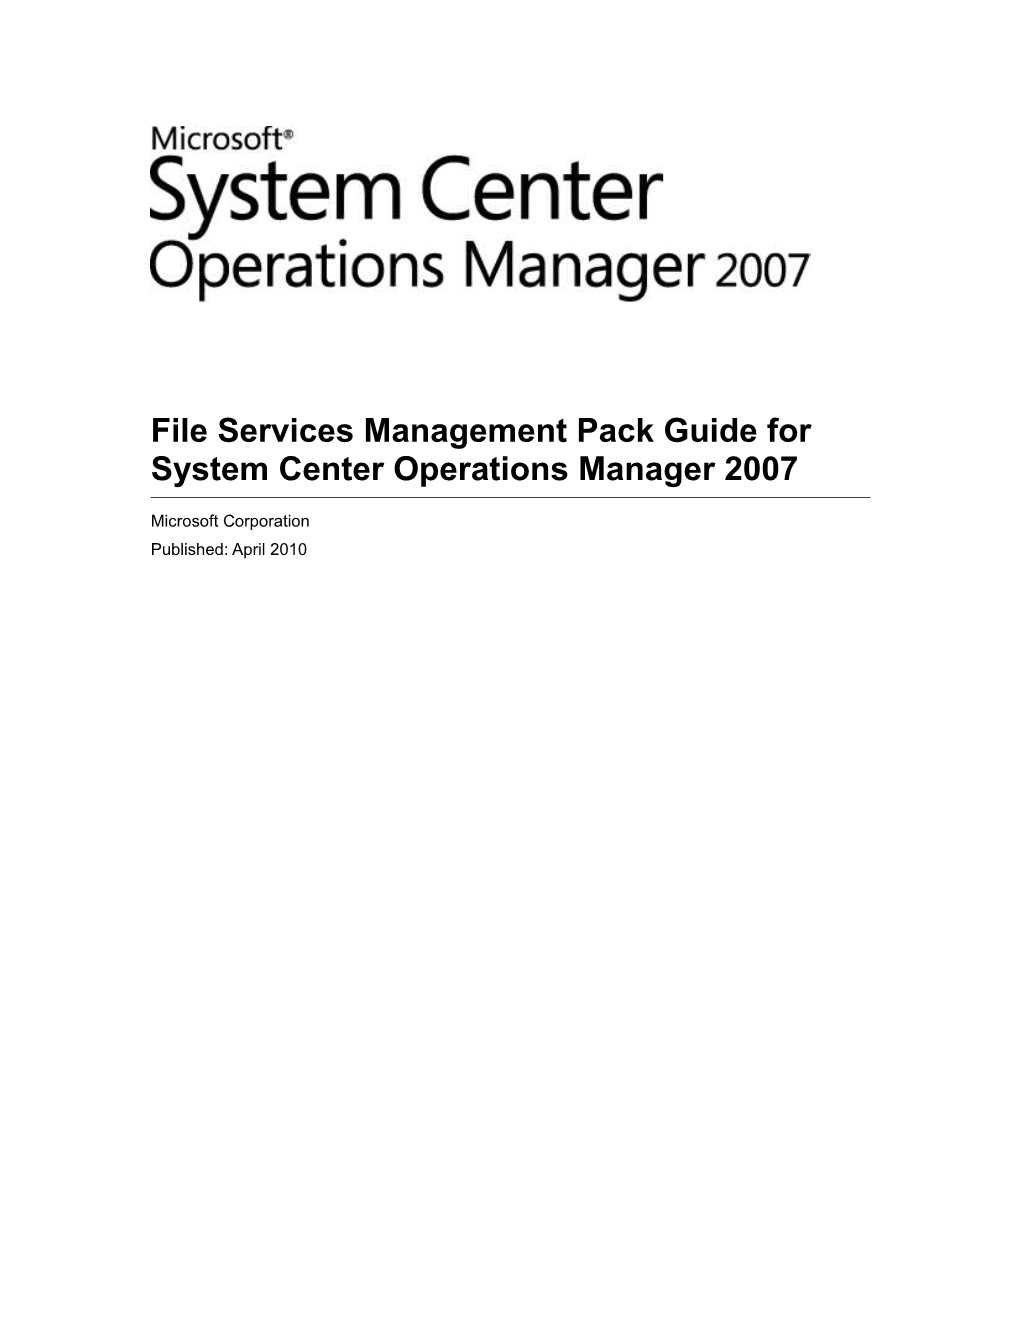 File Services Management Pack Guide for System Center Operations Manager 2007